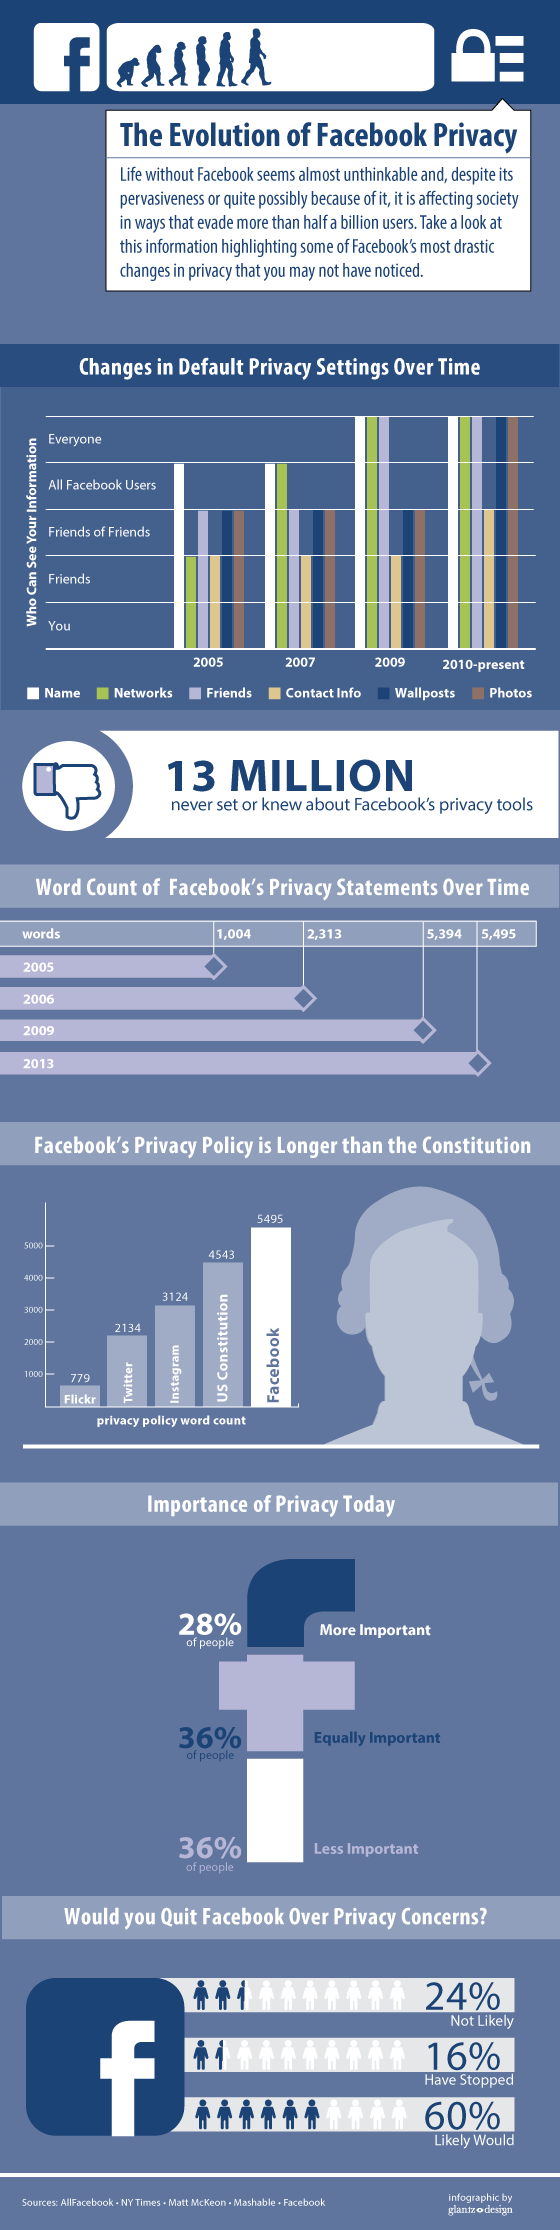 Facebook Privacy Infographic